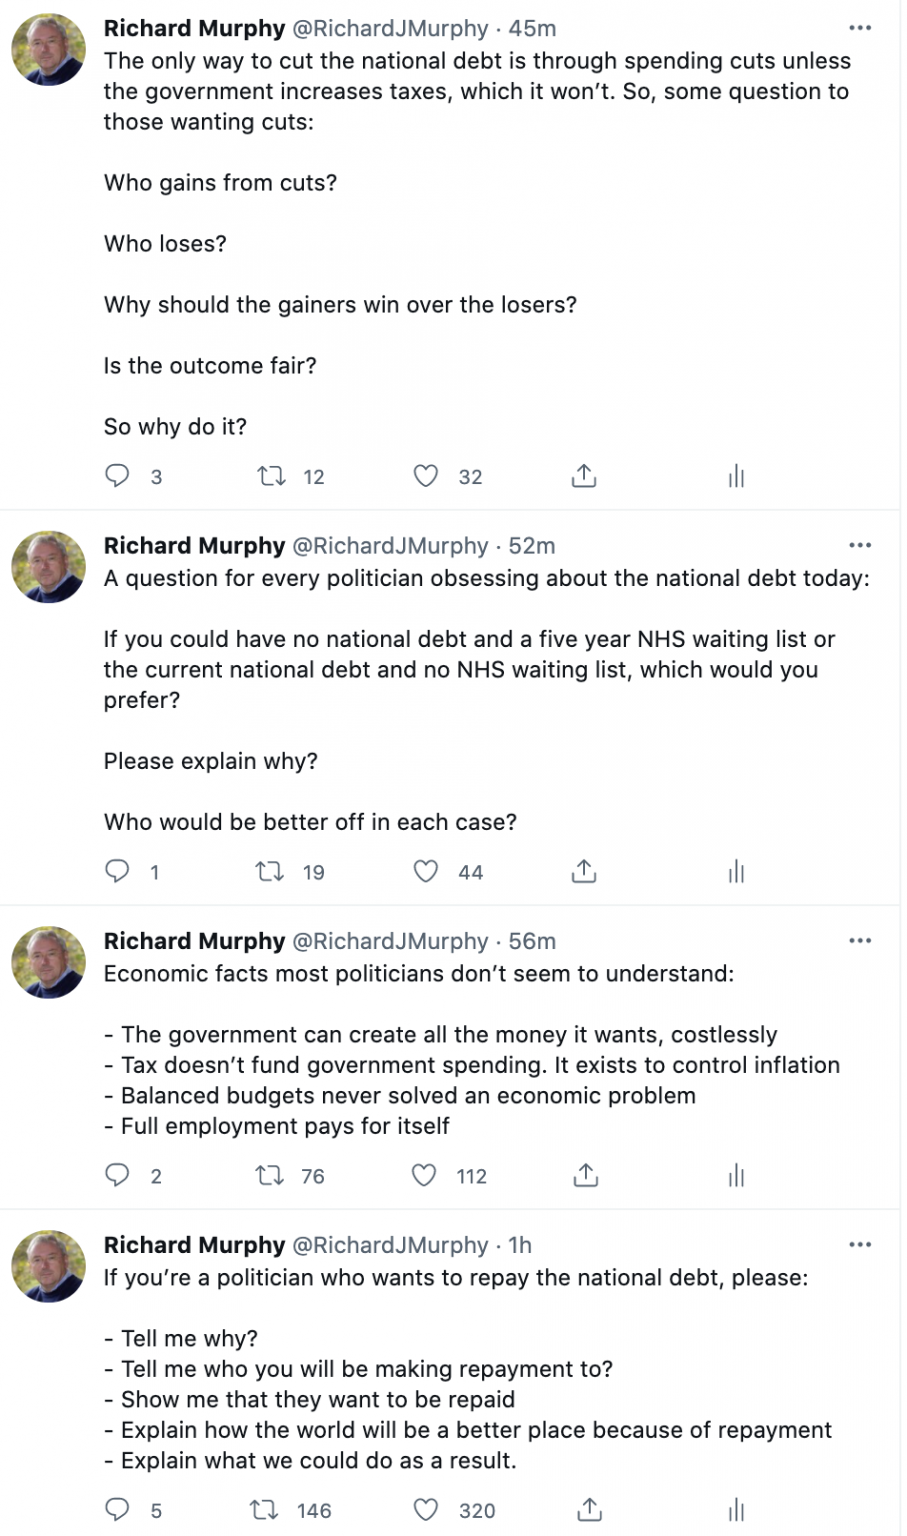 More questions on the national debt